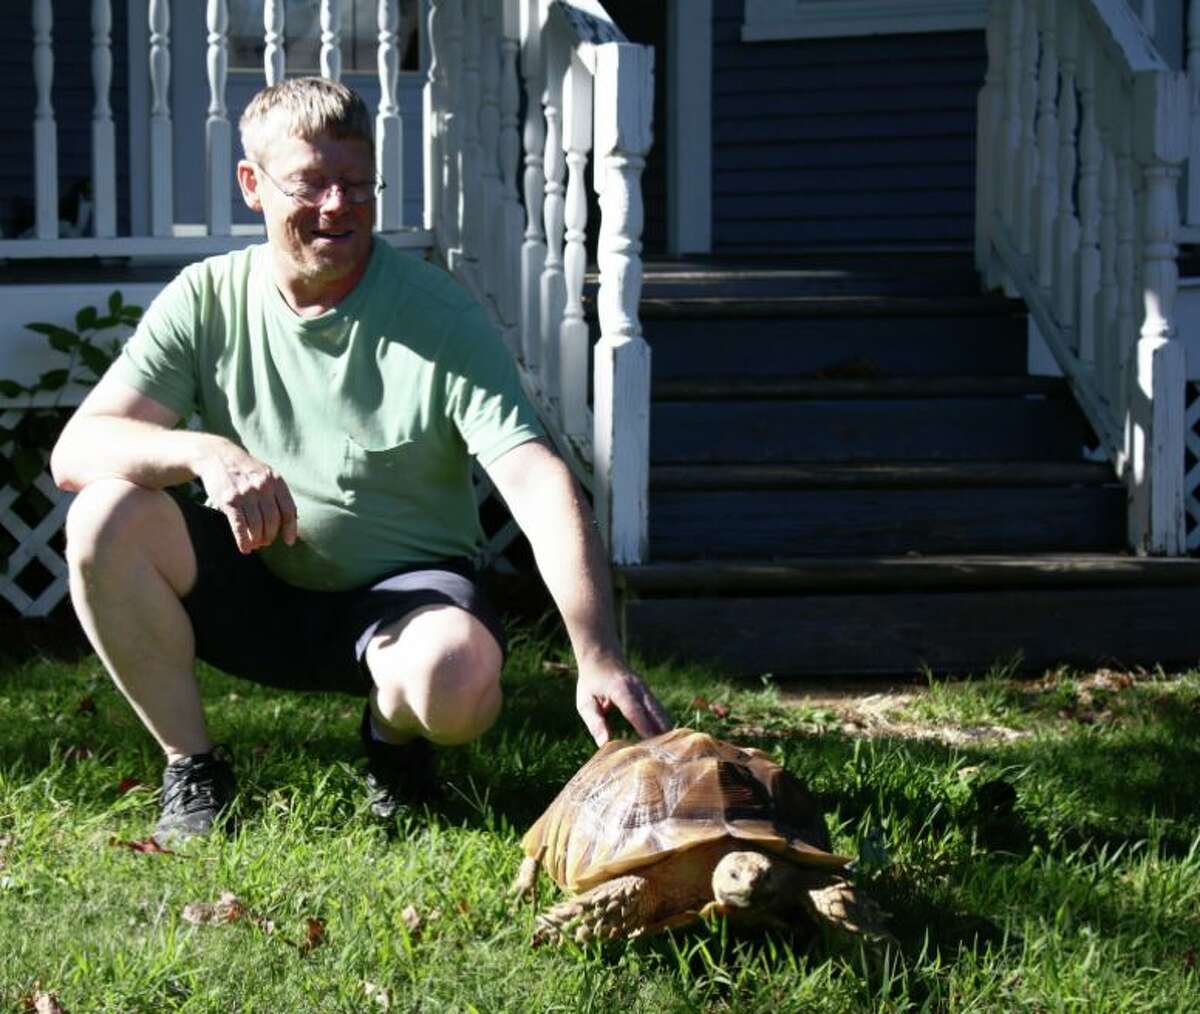 The next time you see Chris Poiter and Mongo around Collinsville, feel free to stop and greet them. Mongo, a 35-pound male sulcata tortoise, enjoys his neighbors.